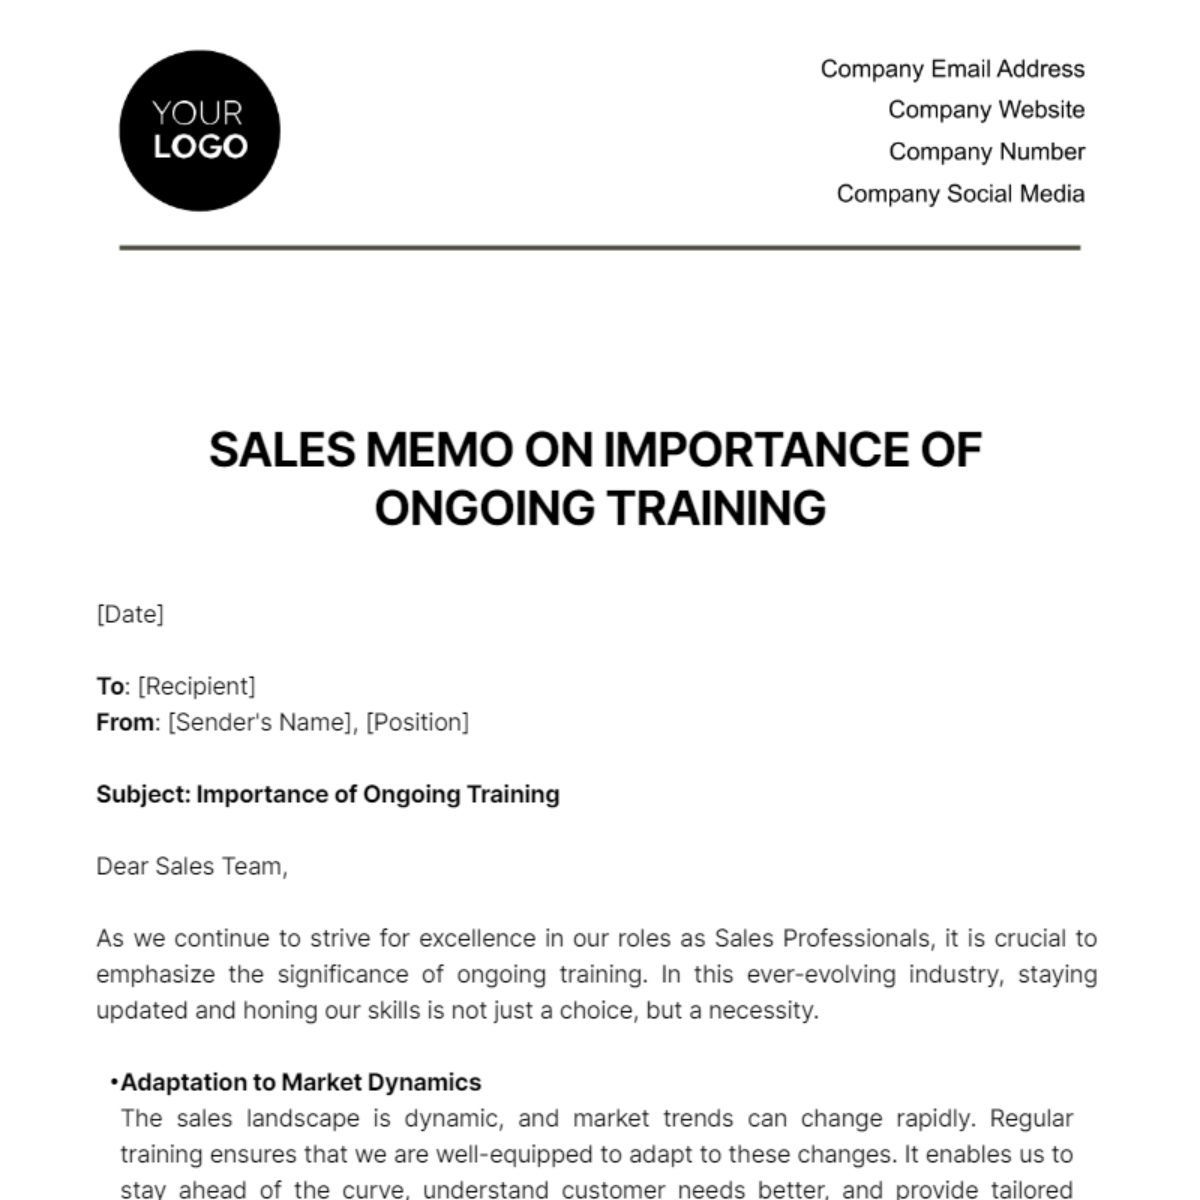 Free Sales Memo on Importance of Ongoing Training Template